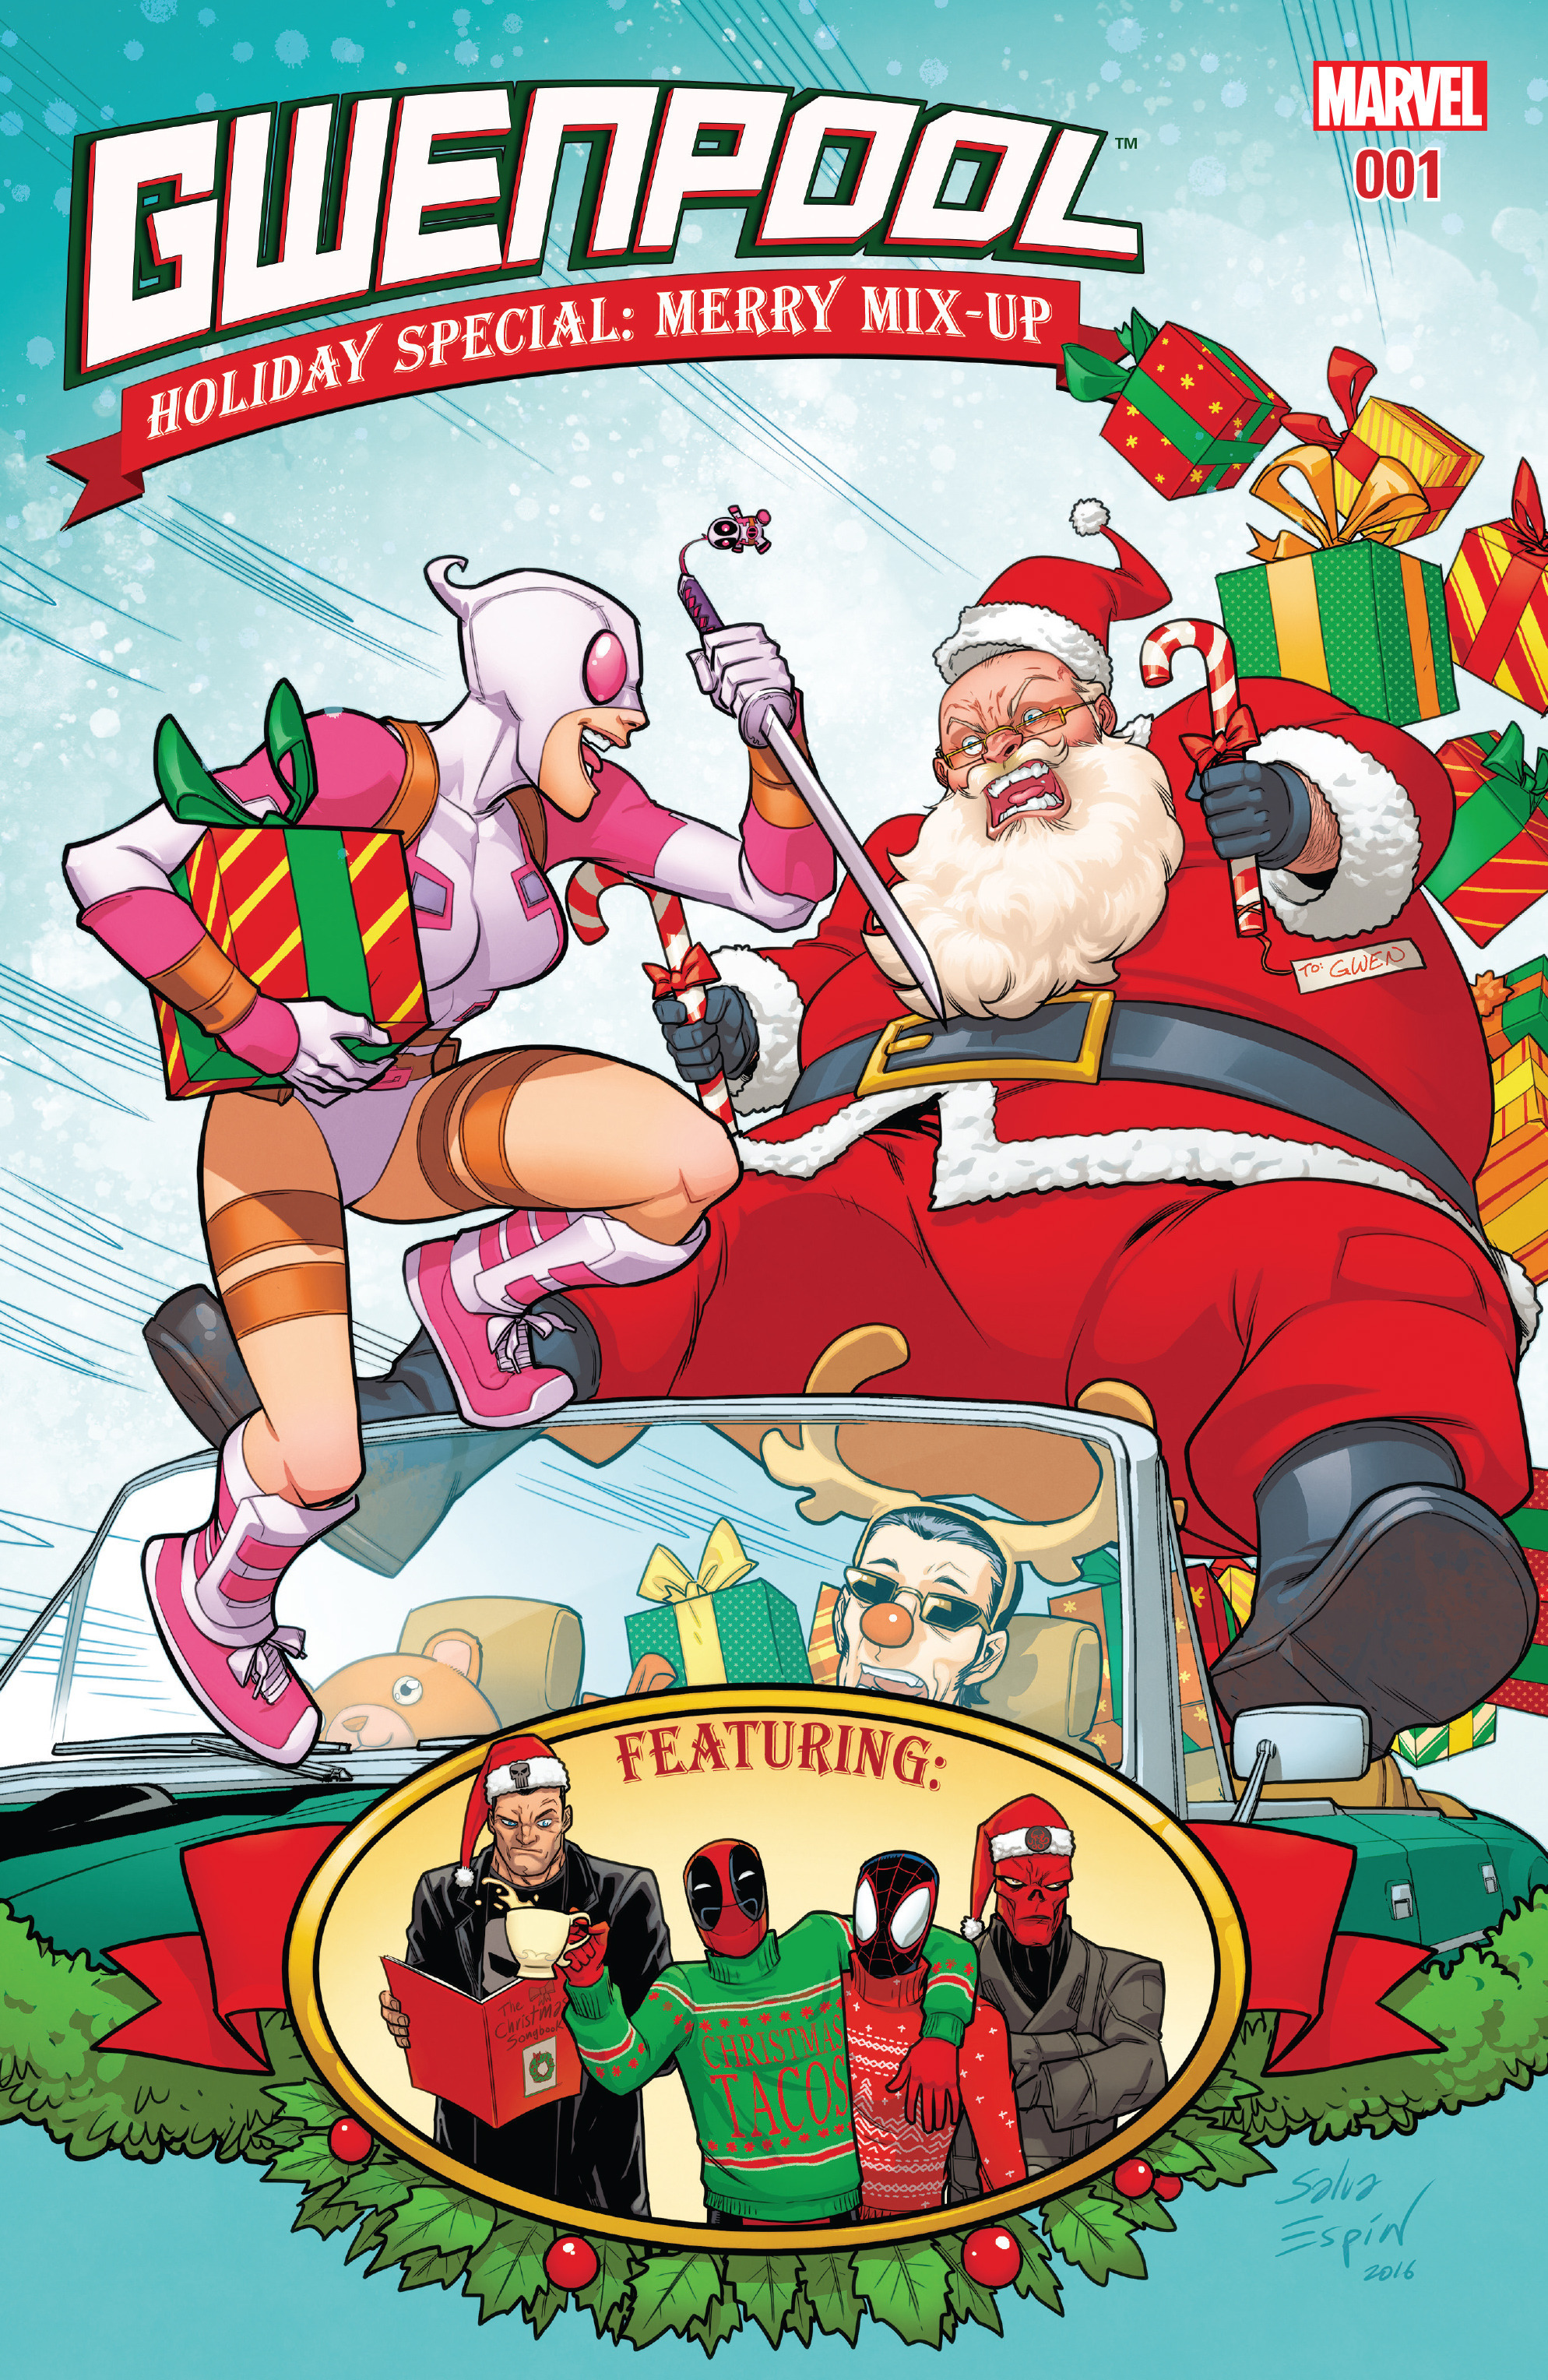 Gwenpool Holiday Special - Merry Mix-Up (2016): Chapter 1 - Page 1